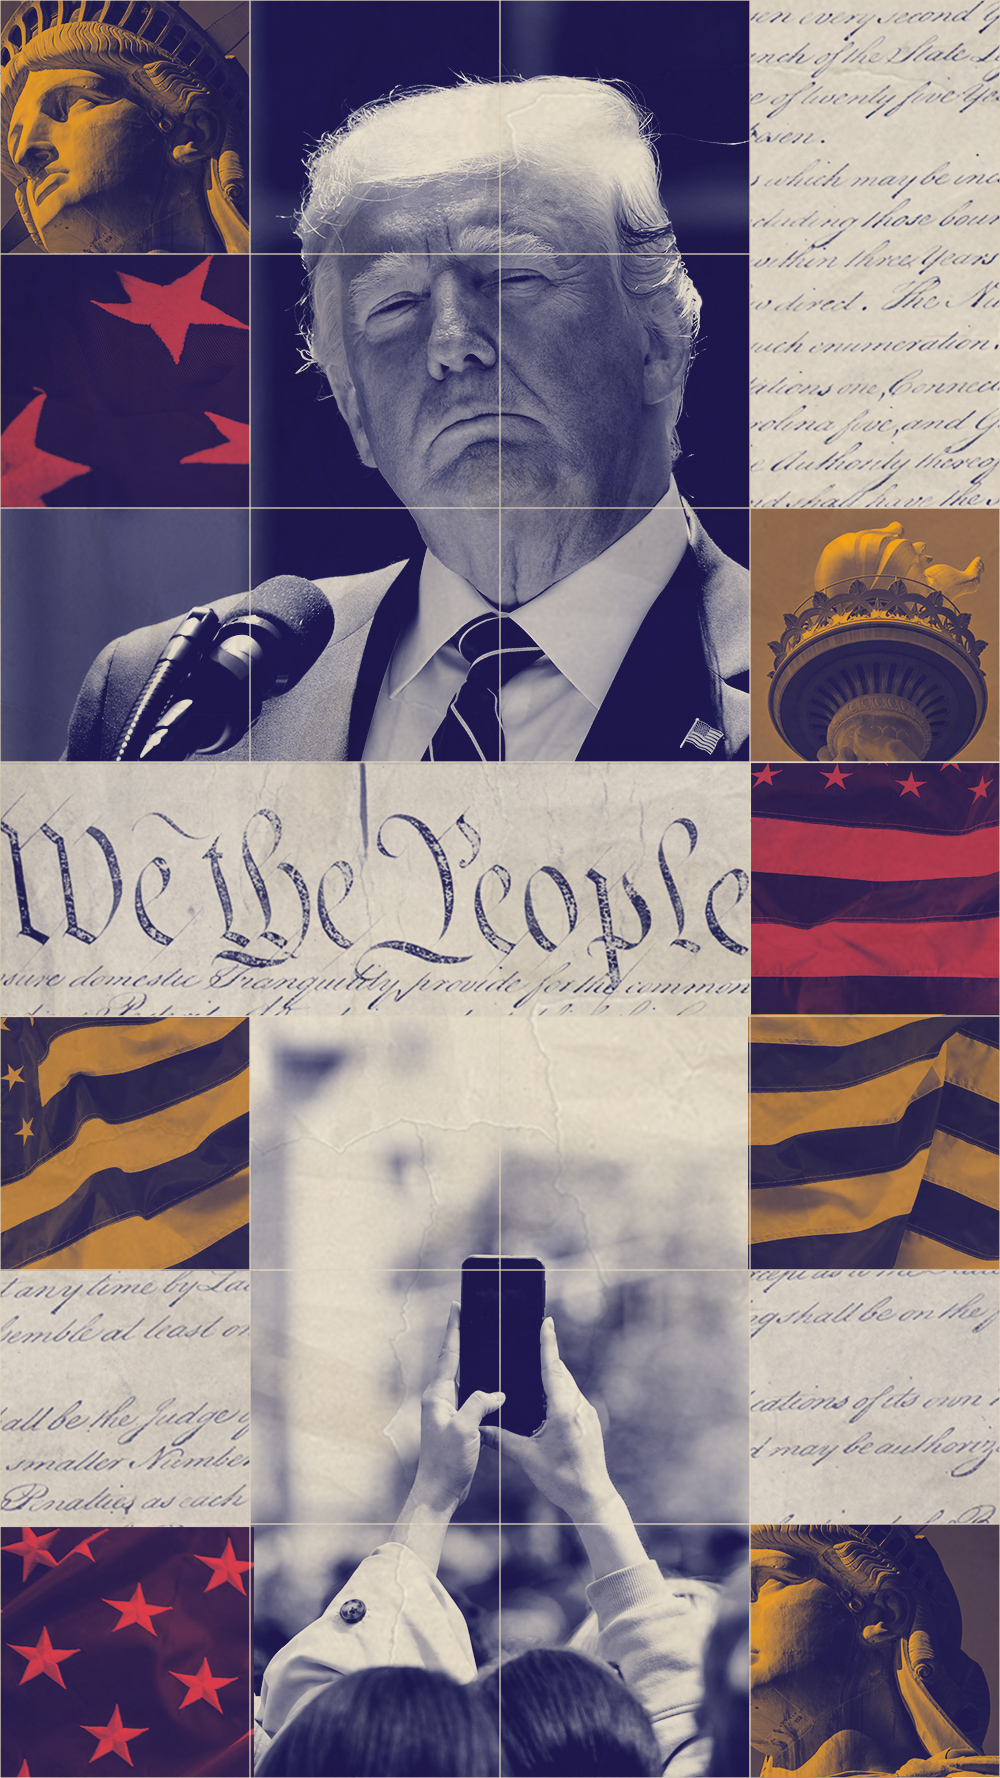 A graphic featuring Trump and imagery pertaining to surveillance and first amendment rights.